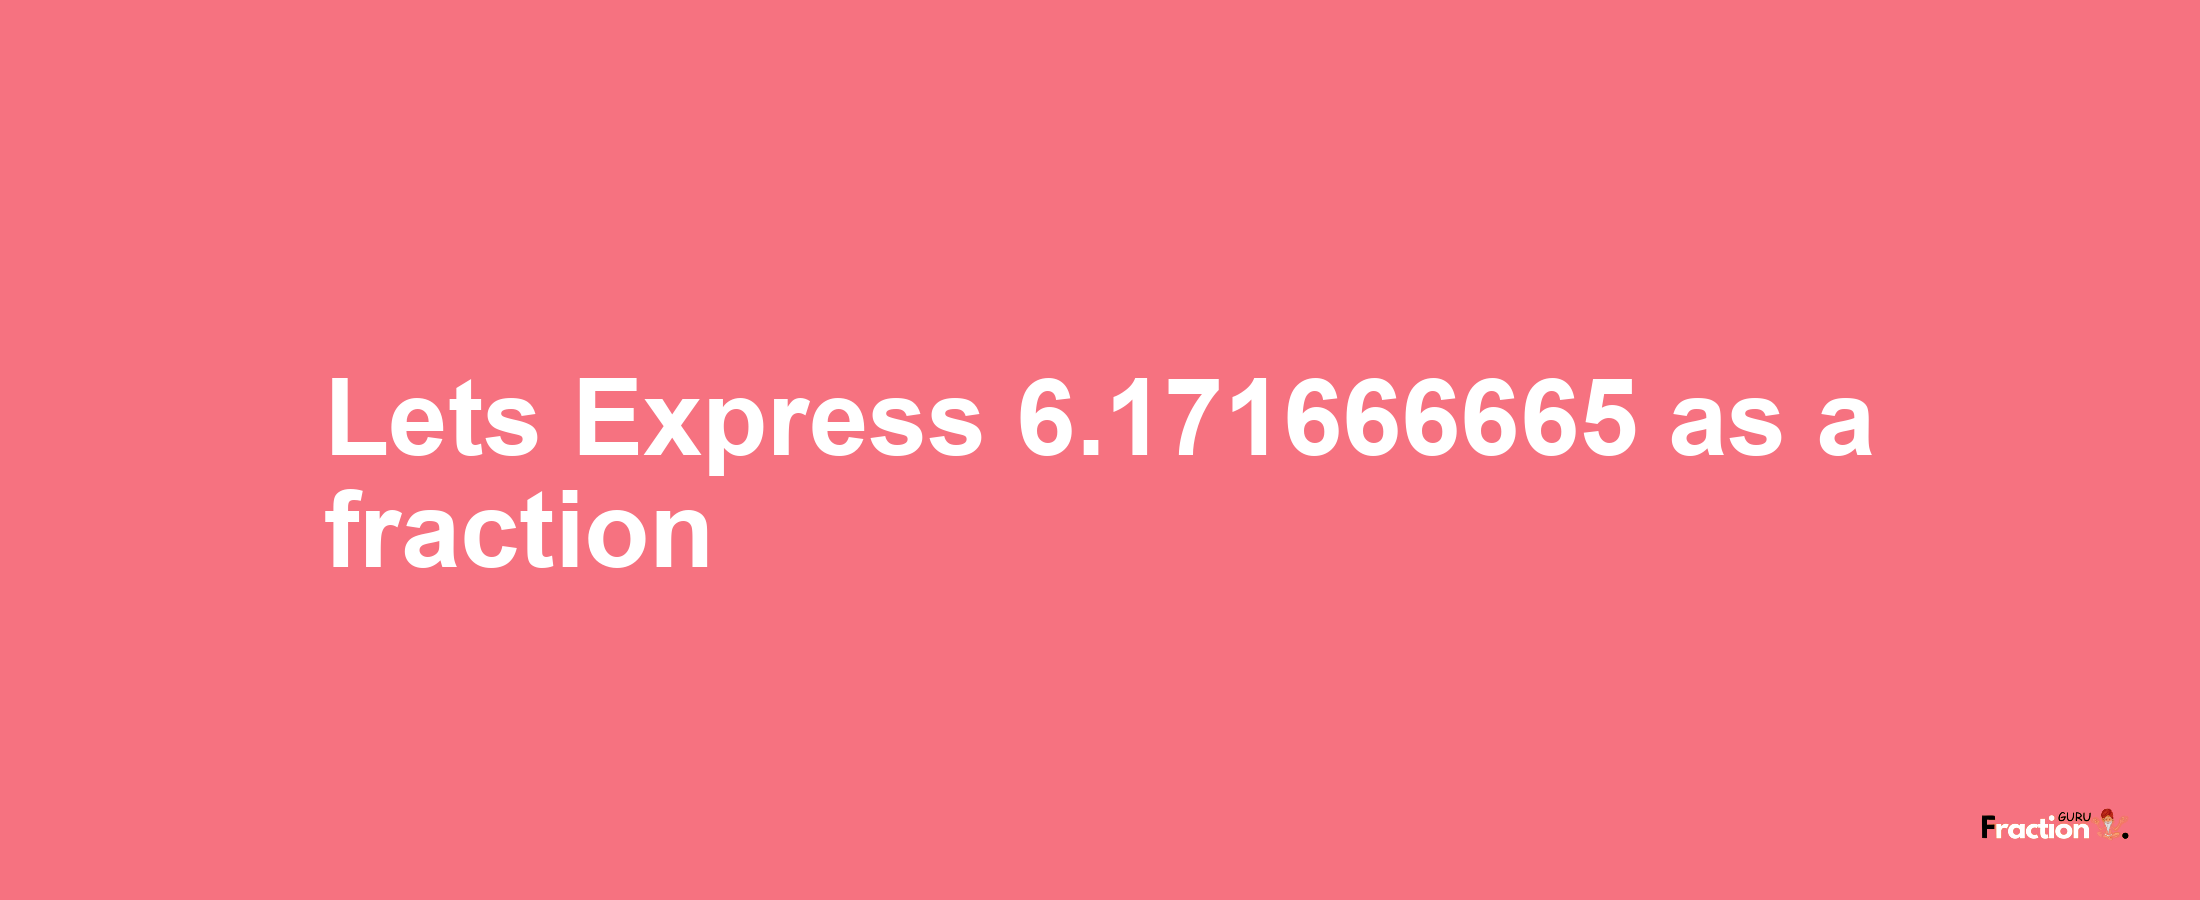 Lets Express 6.171666665 as afraction